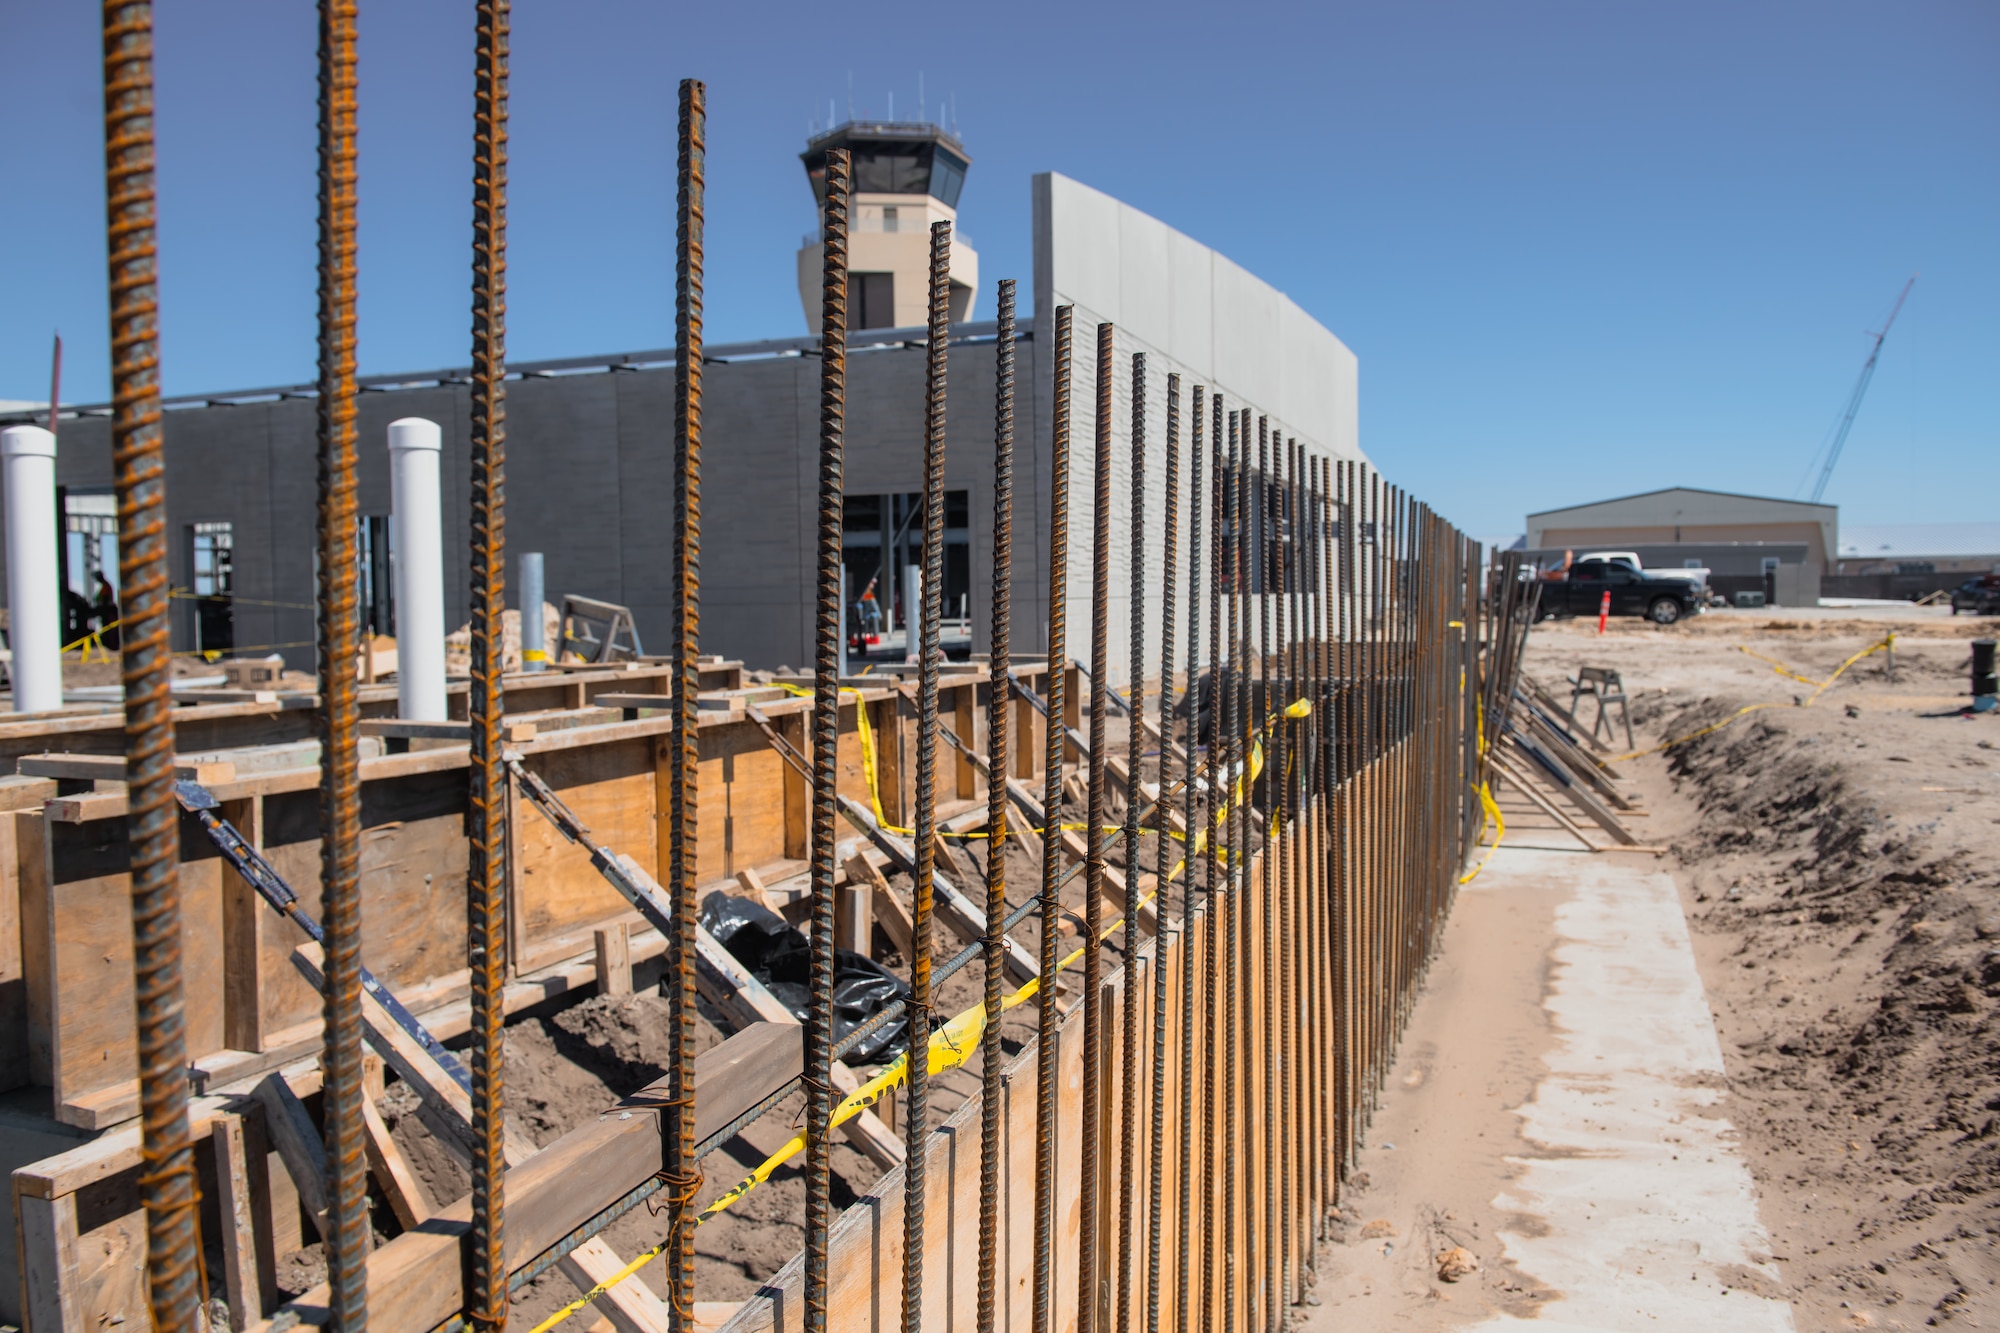 The cooling tower and generator pads are being installed at the site of the operations support squadron facility